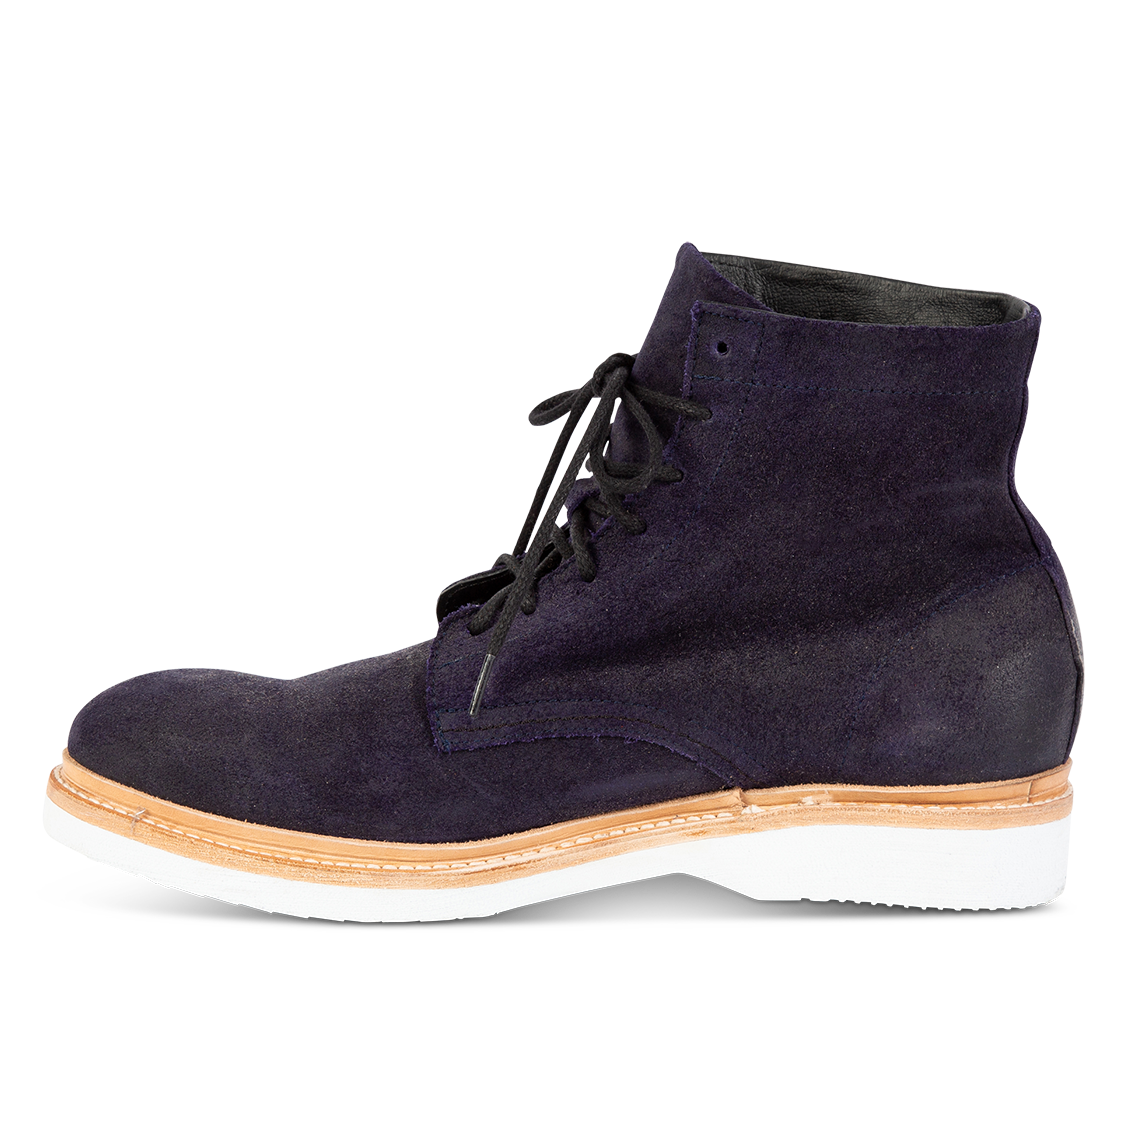 Inside view showing contrasting suede upper and soft sole on FREEBIRD men's Wheeler navy suede shoe